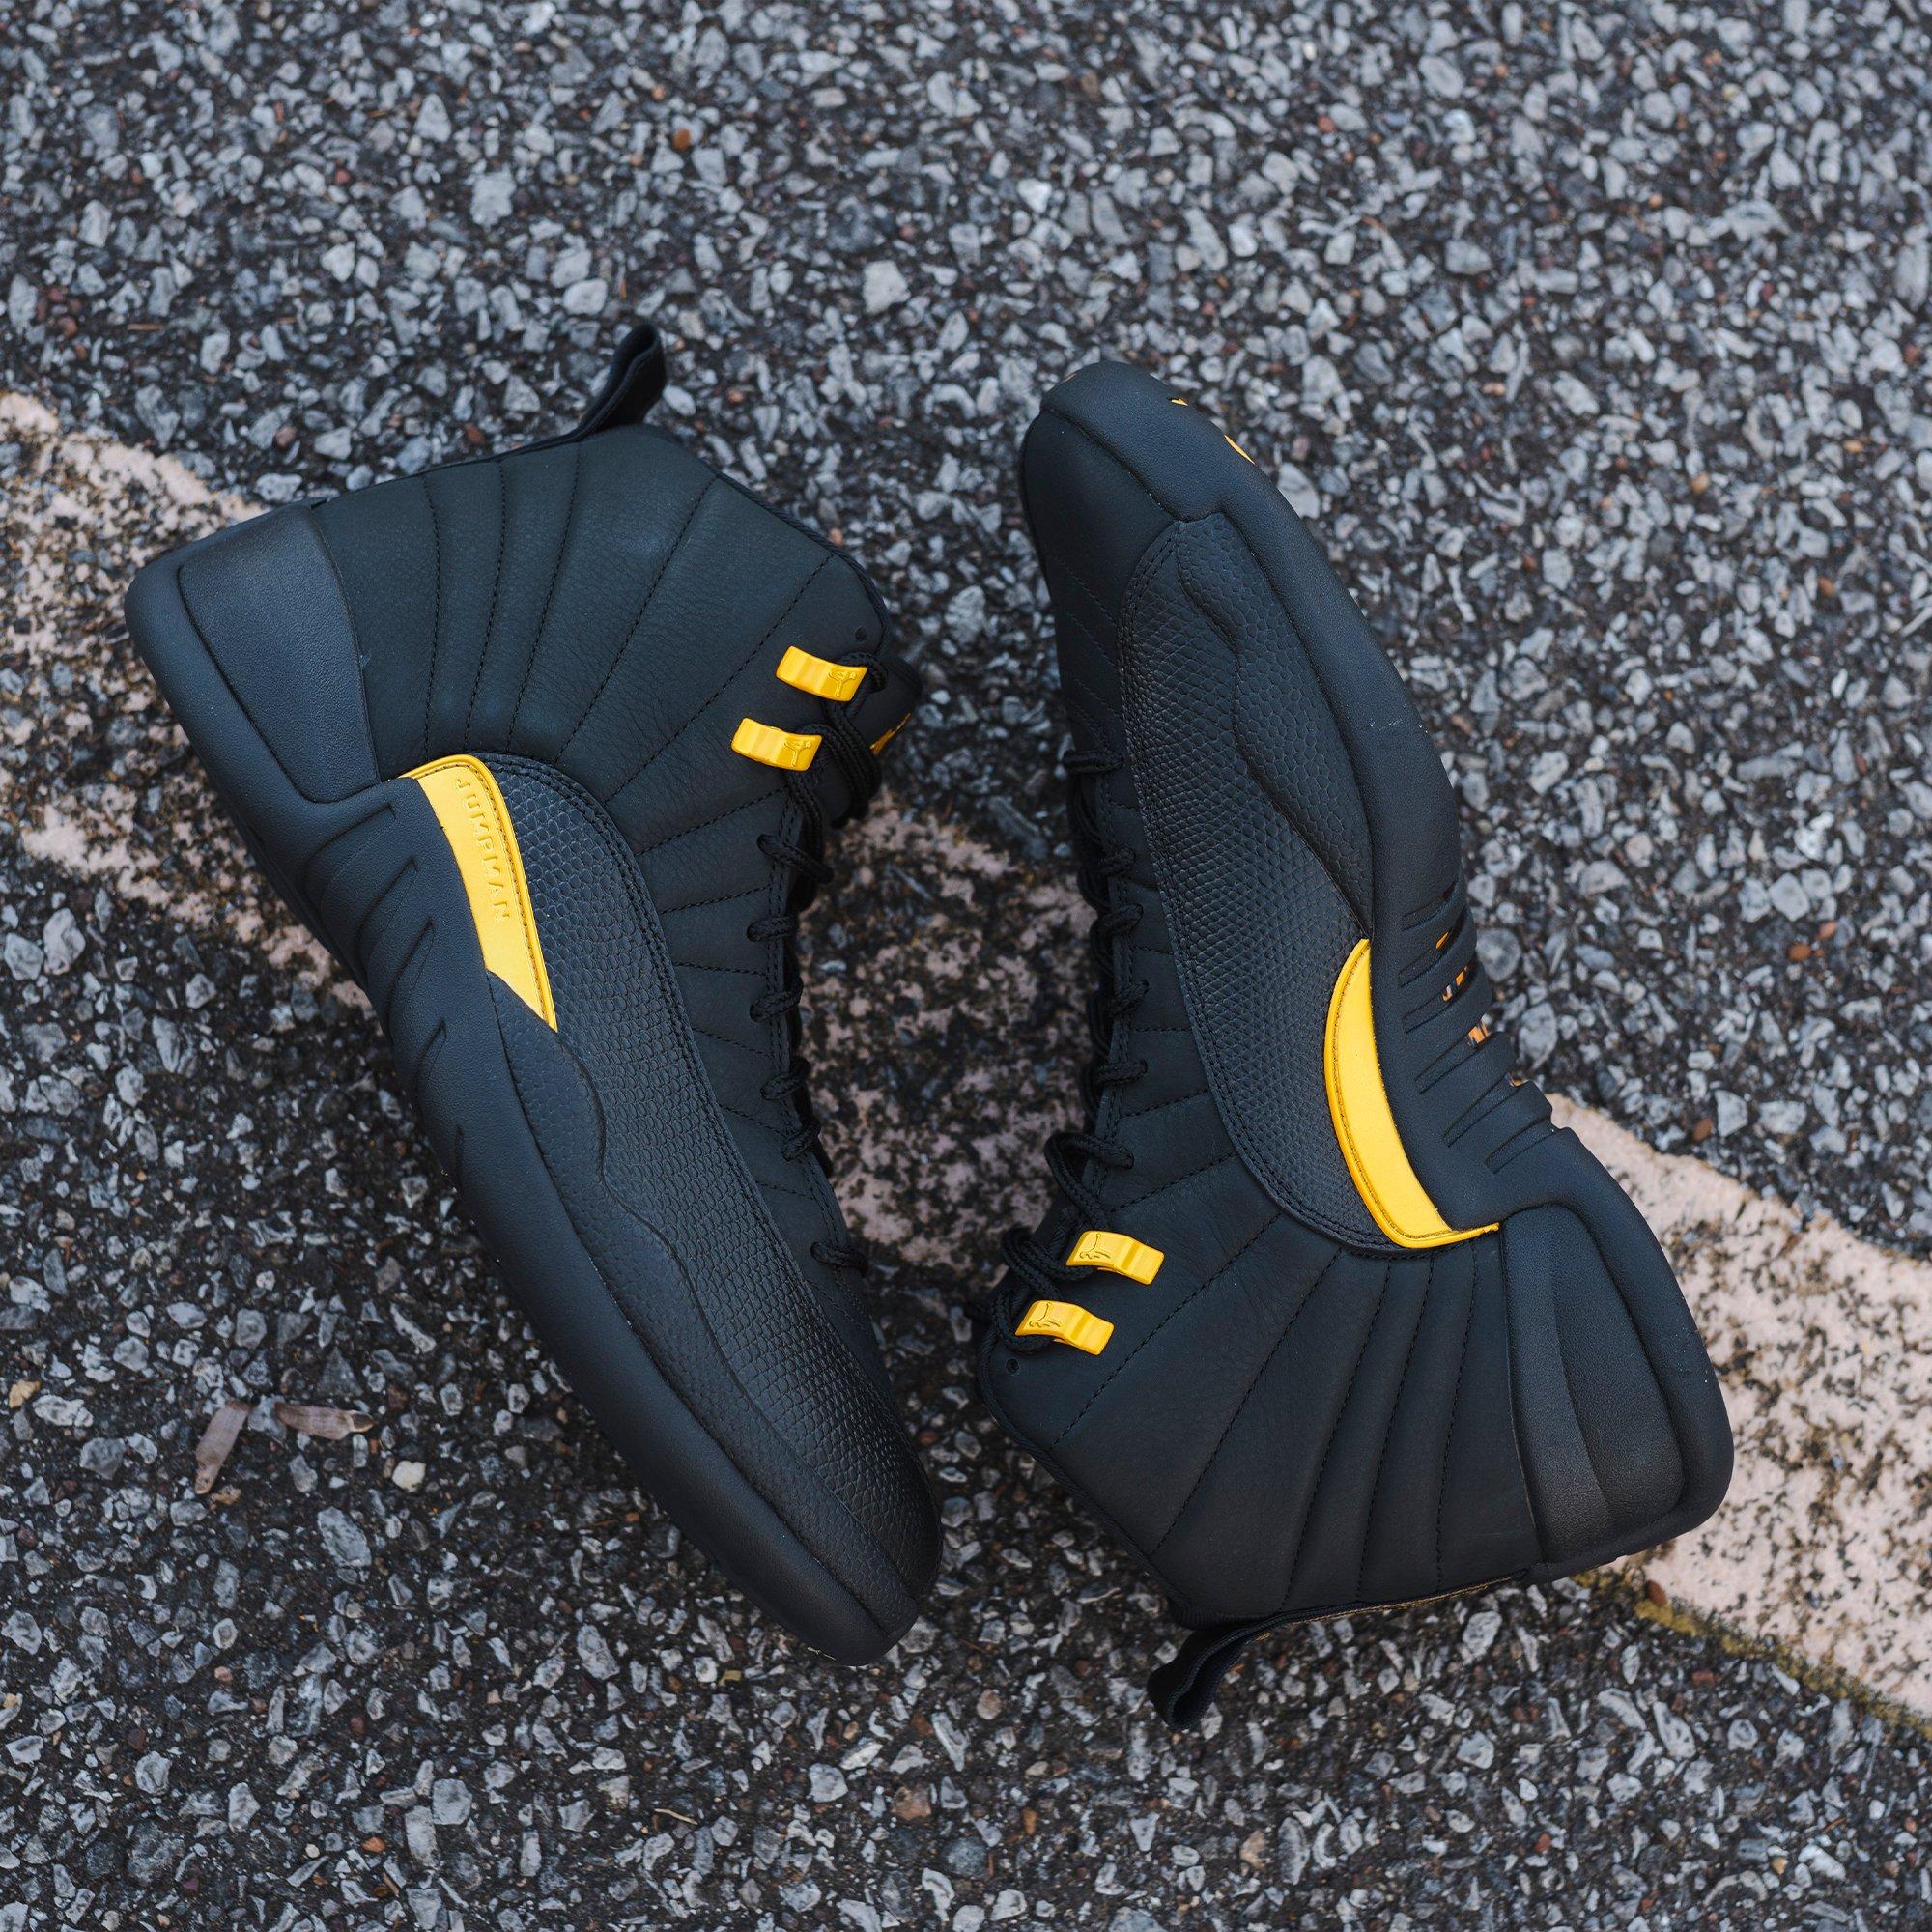 black and yellow jordan 12 outfit